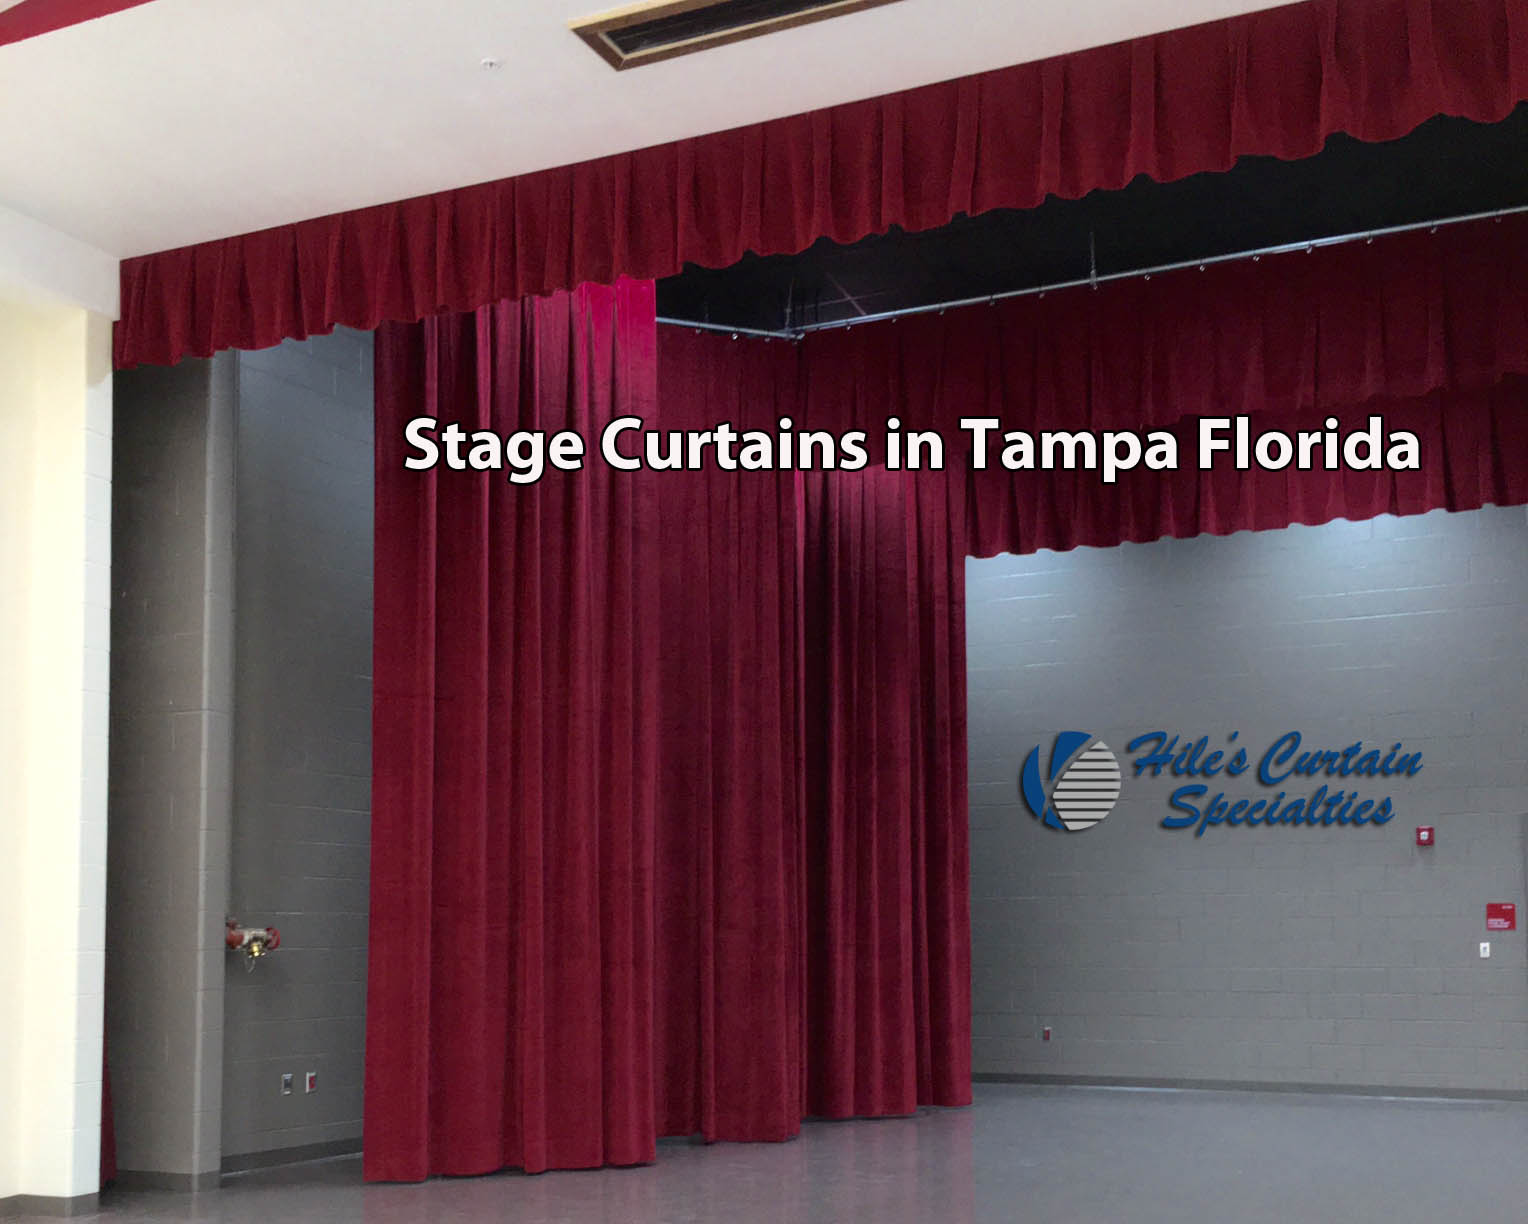 Stage Curtains in Tampa